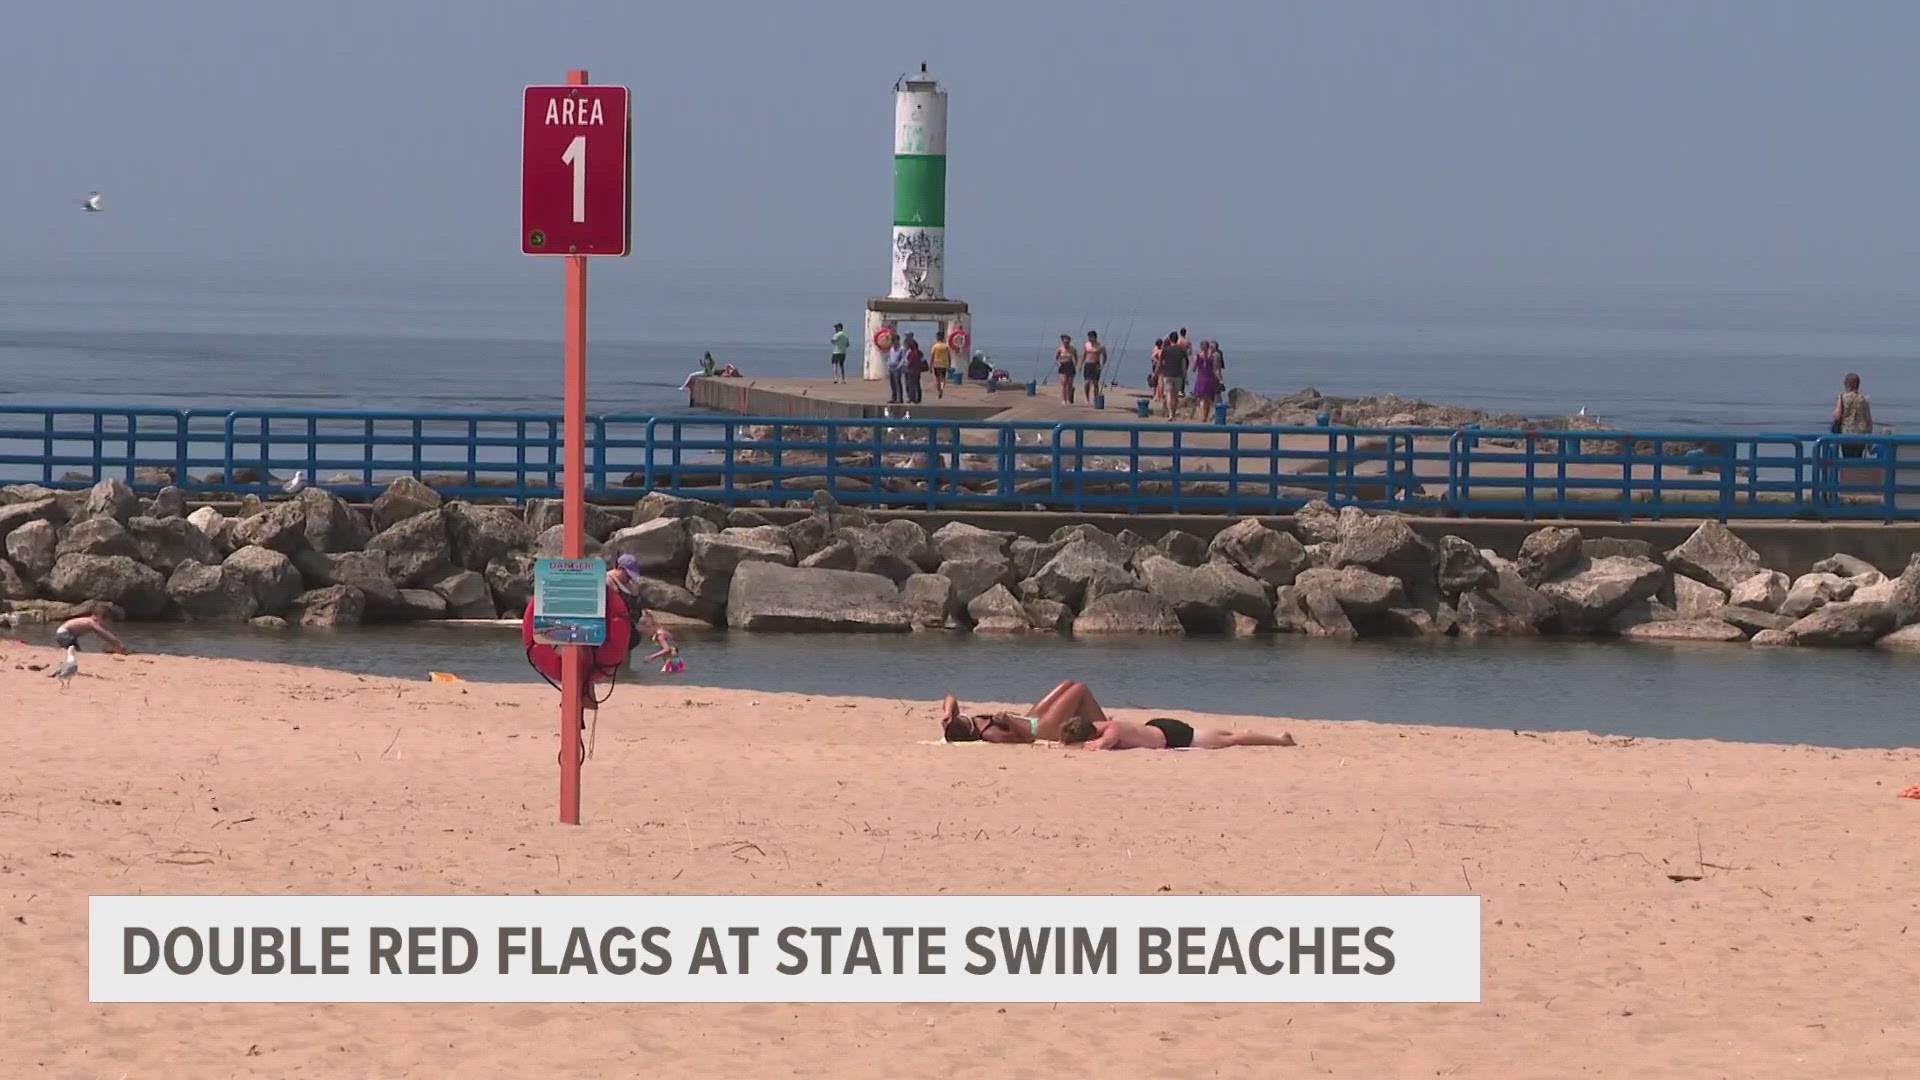 Now, there are four flags on the beaches to promote safety while swimming.